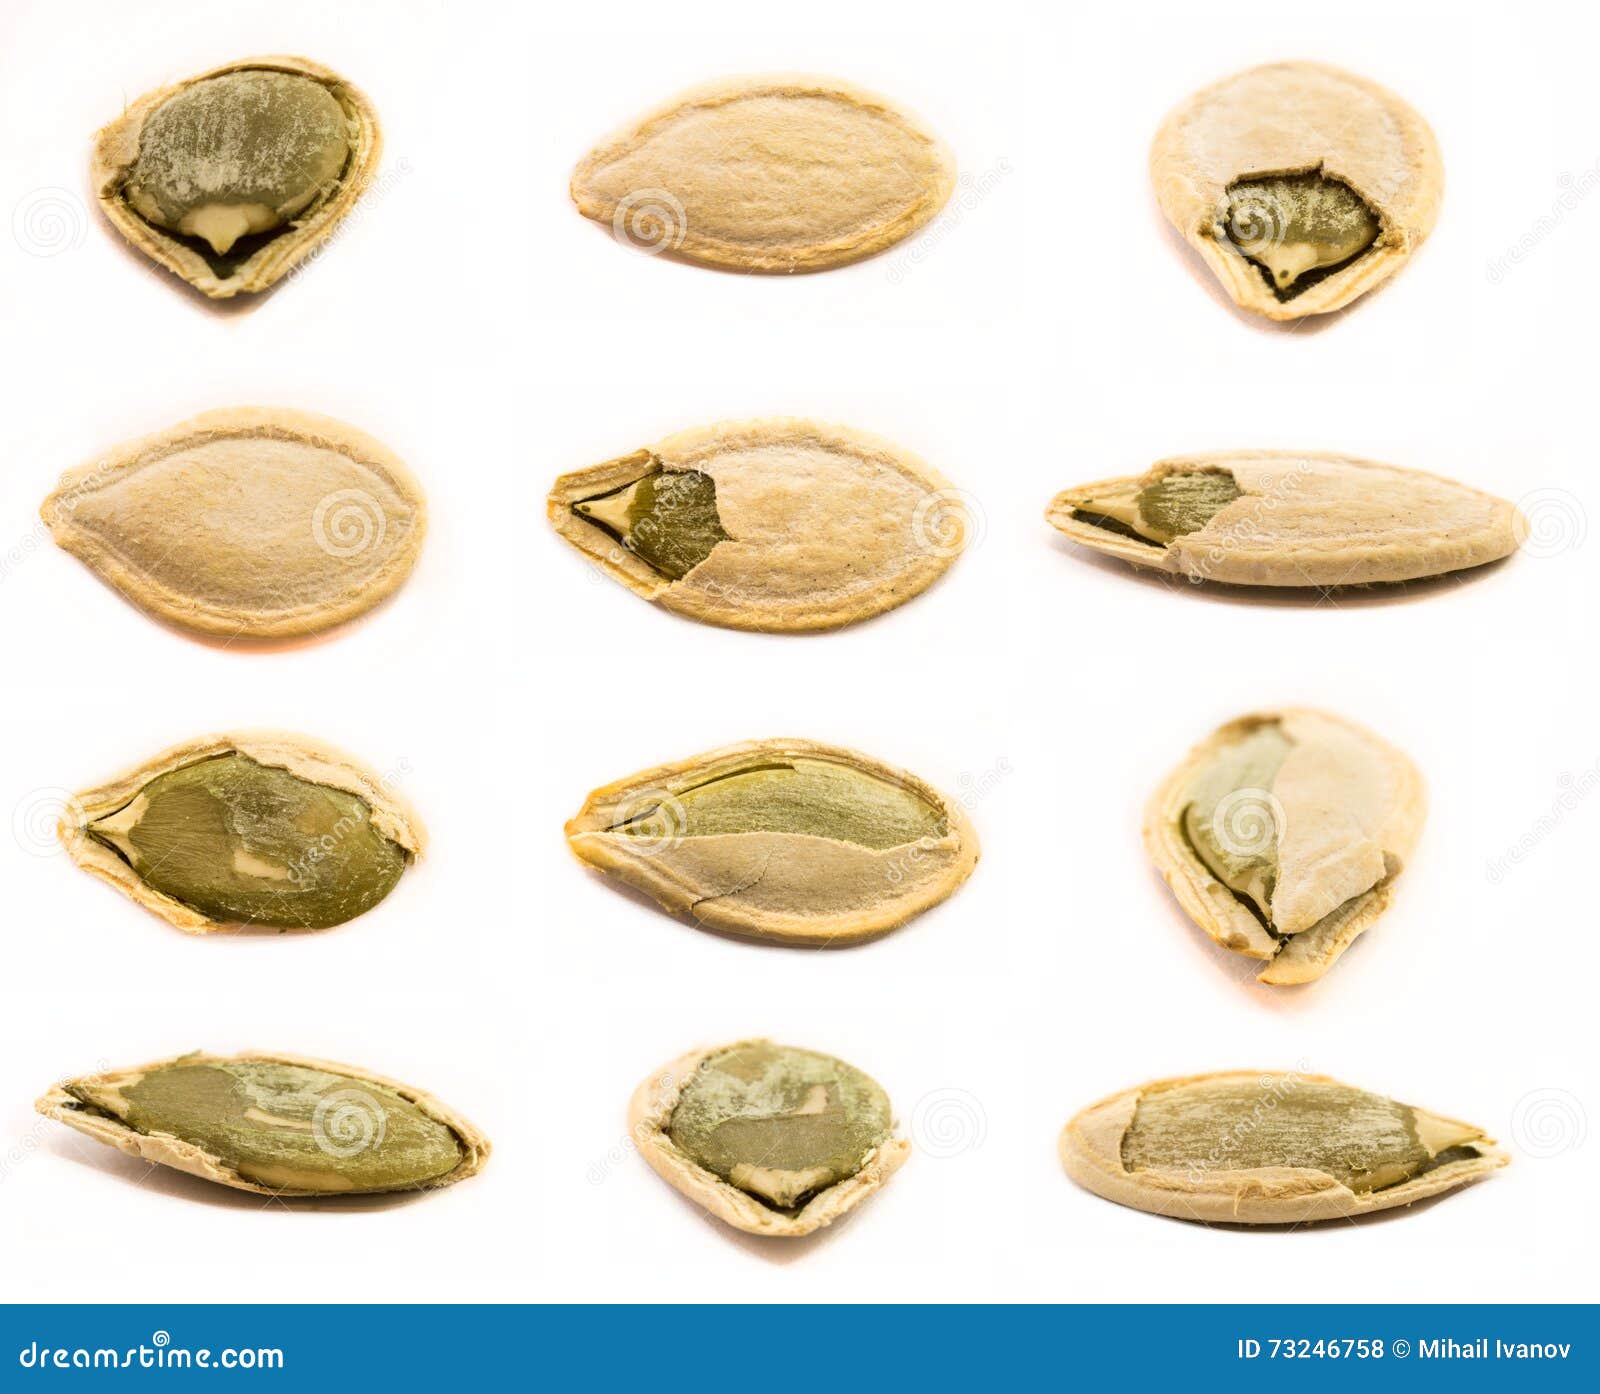 A set of pumpkin seeds isolated on white background.